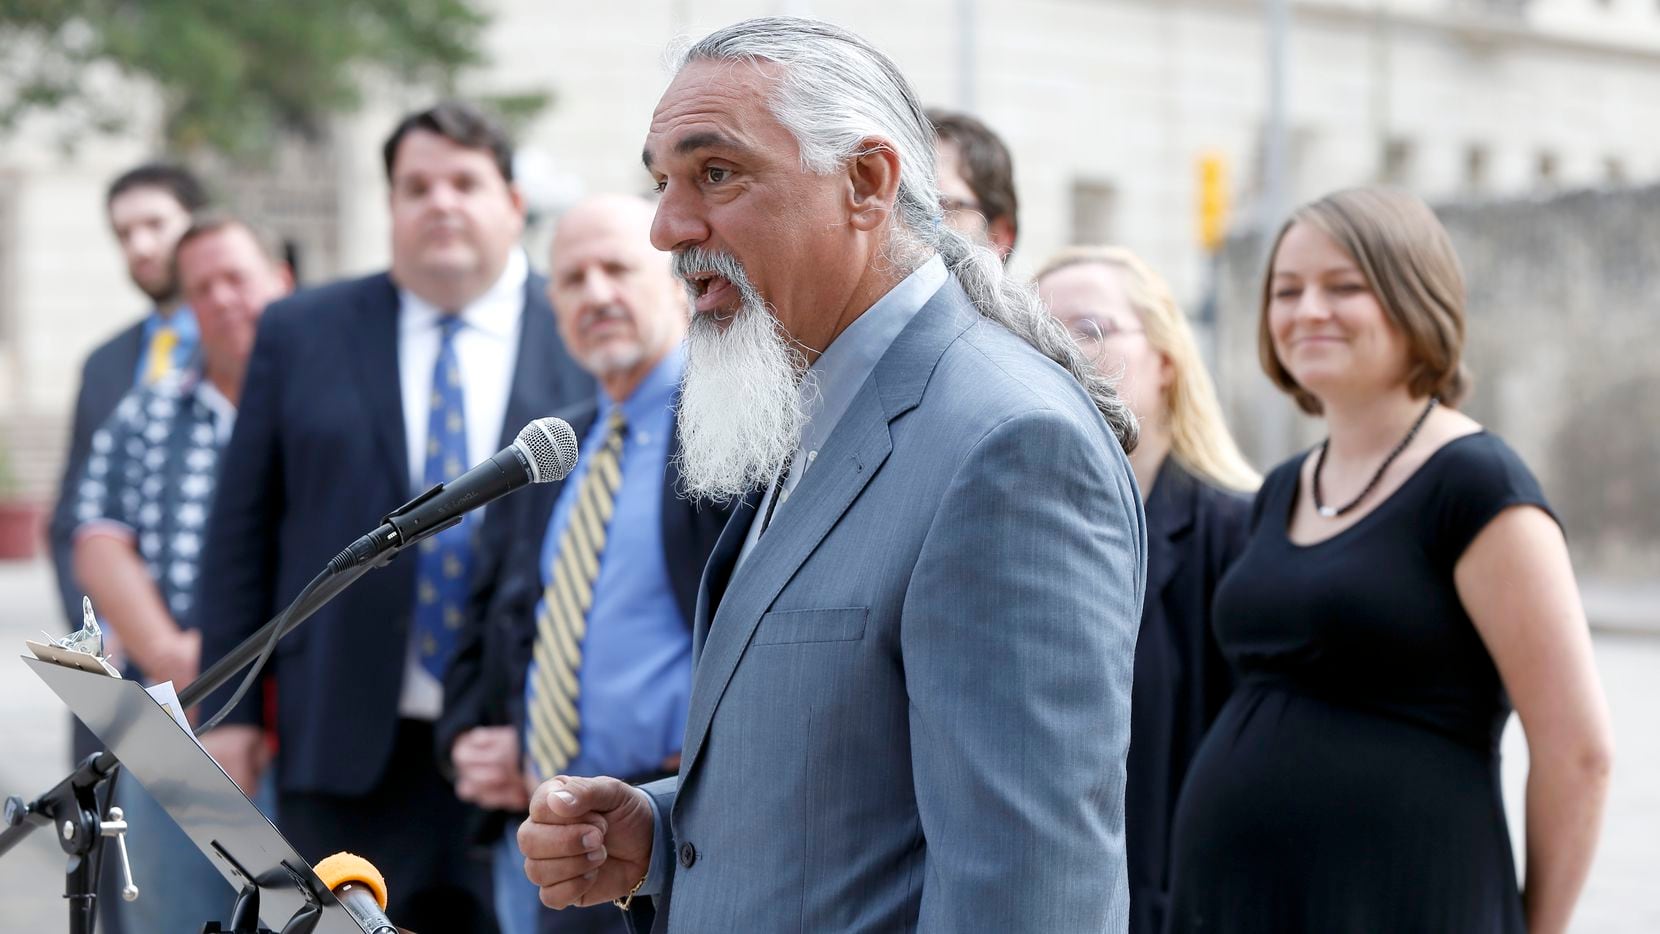 Jamie Balagia, who's been convicted of shaking down Colombian drug lords, spoke as a Libertarian party candidate for Texas attorney general on May 1, 2014, in San Antonio.